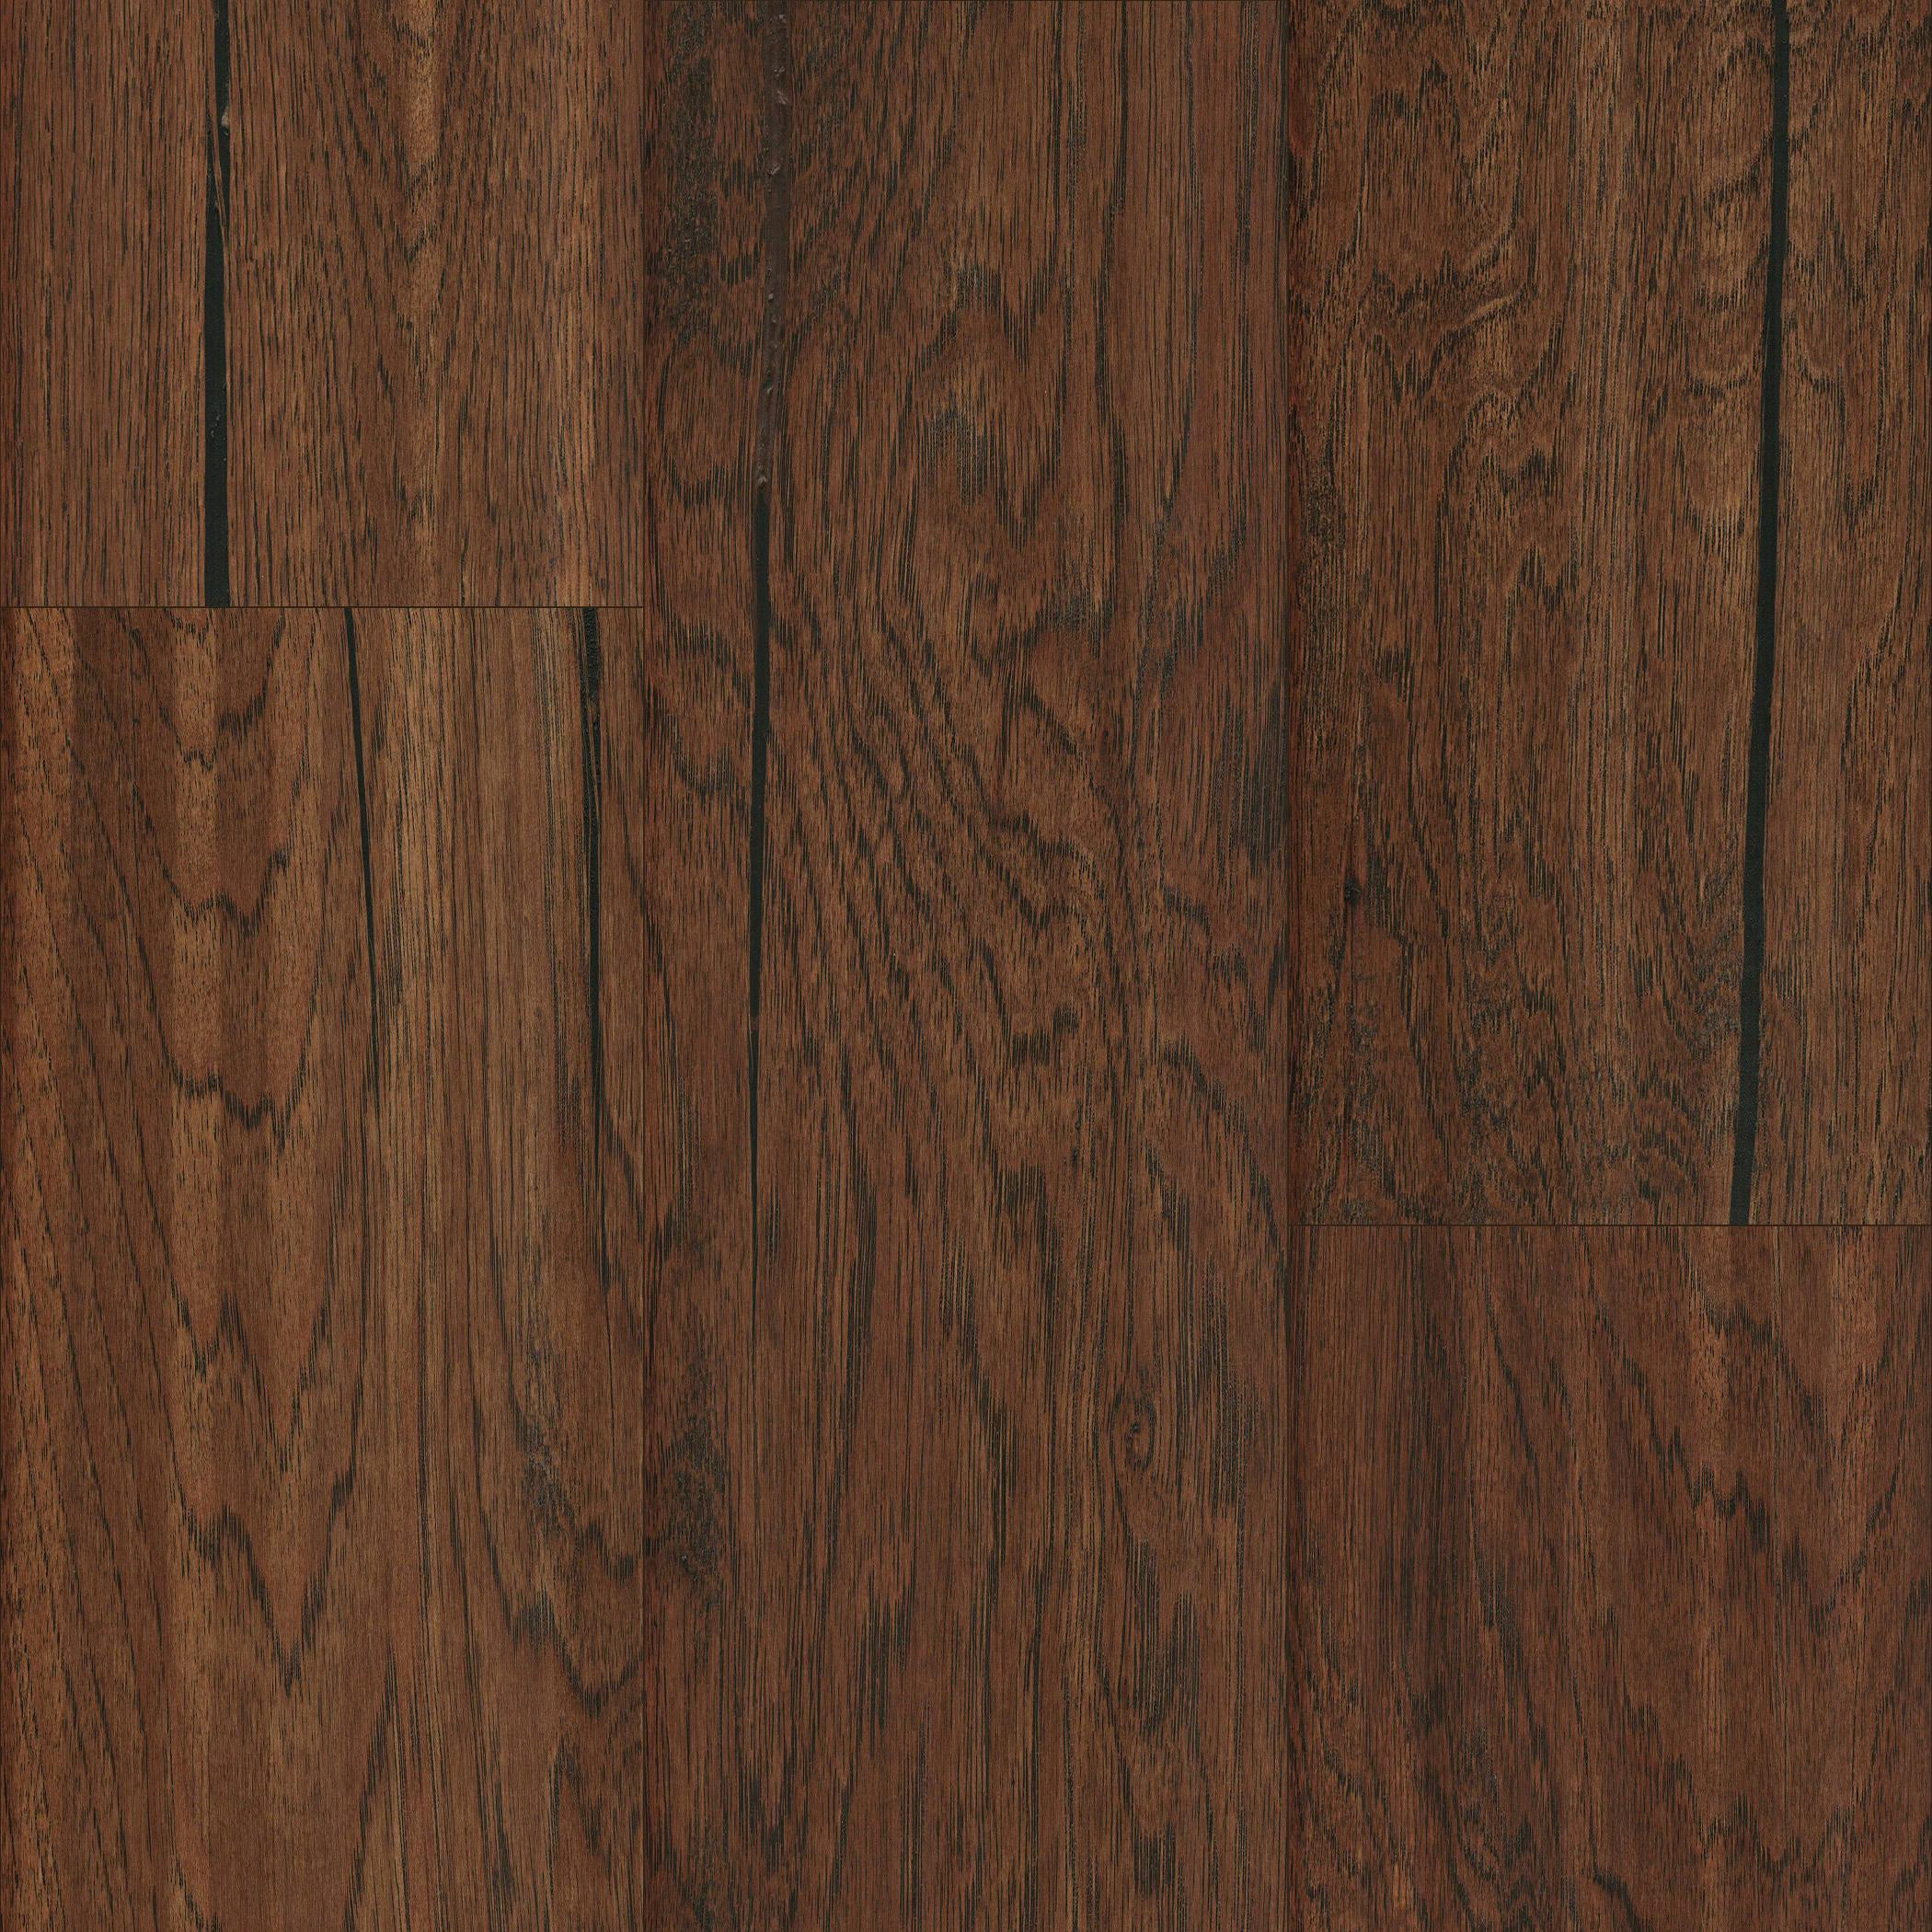 18 Stunning 5 Inch Vs 7 Inch Hardwood Flooring 2023 free download 5 inch vs 7 inch hardwood flooring of mullican san marco hickory provincial 7 sculpted engineered in mullican san marco hickory provincial 7 sculpted engineered hardwood flooring